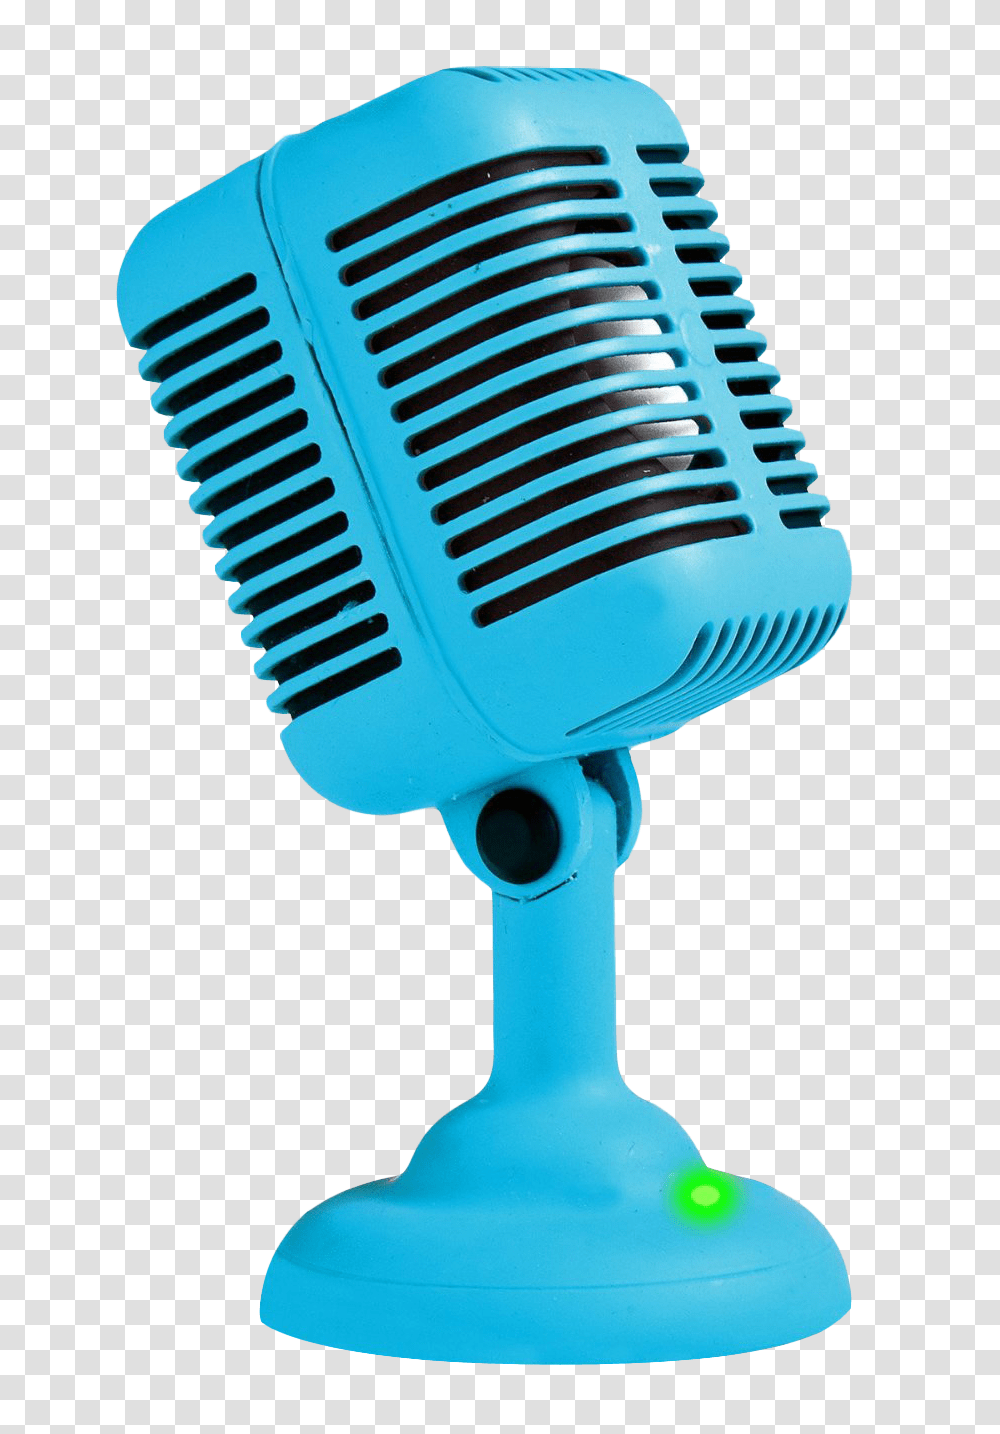 Download Free Microphone Stand Blue Microphone, Electrical Device Transparent Png